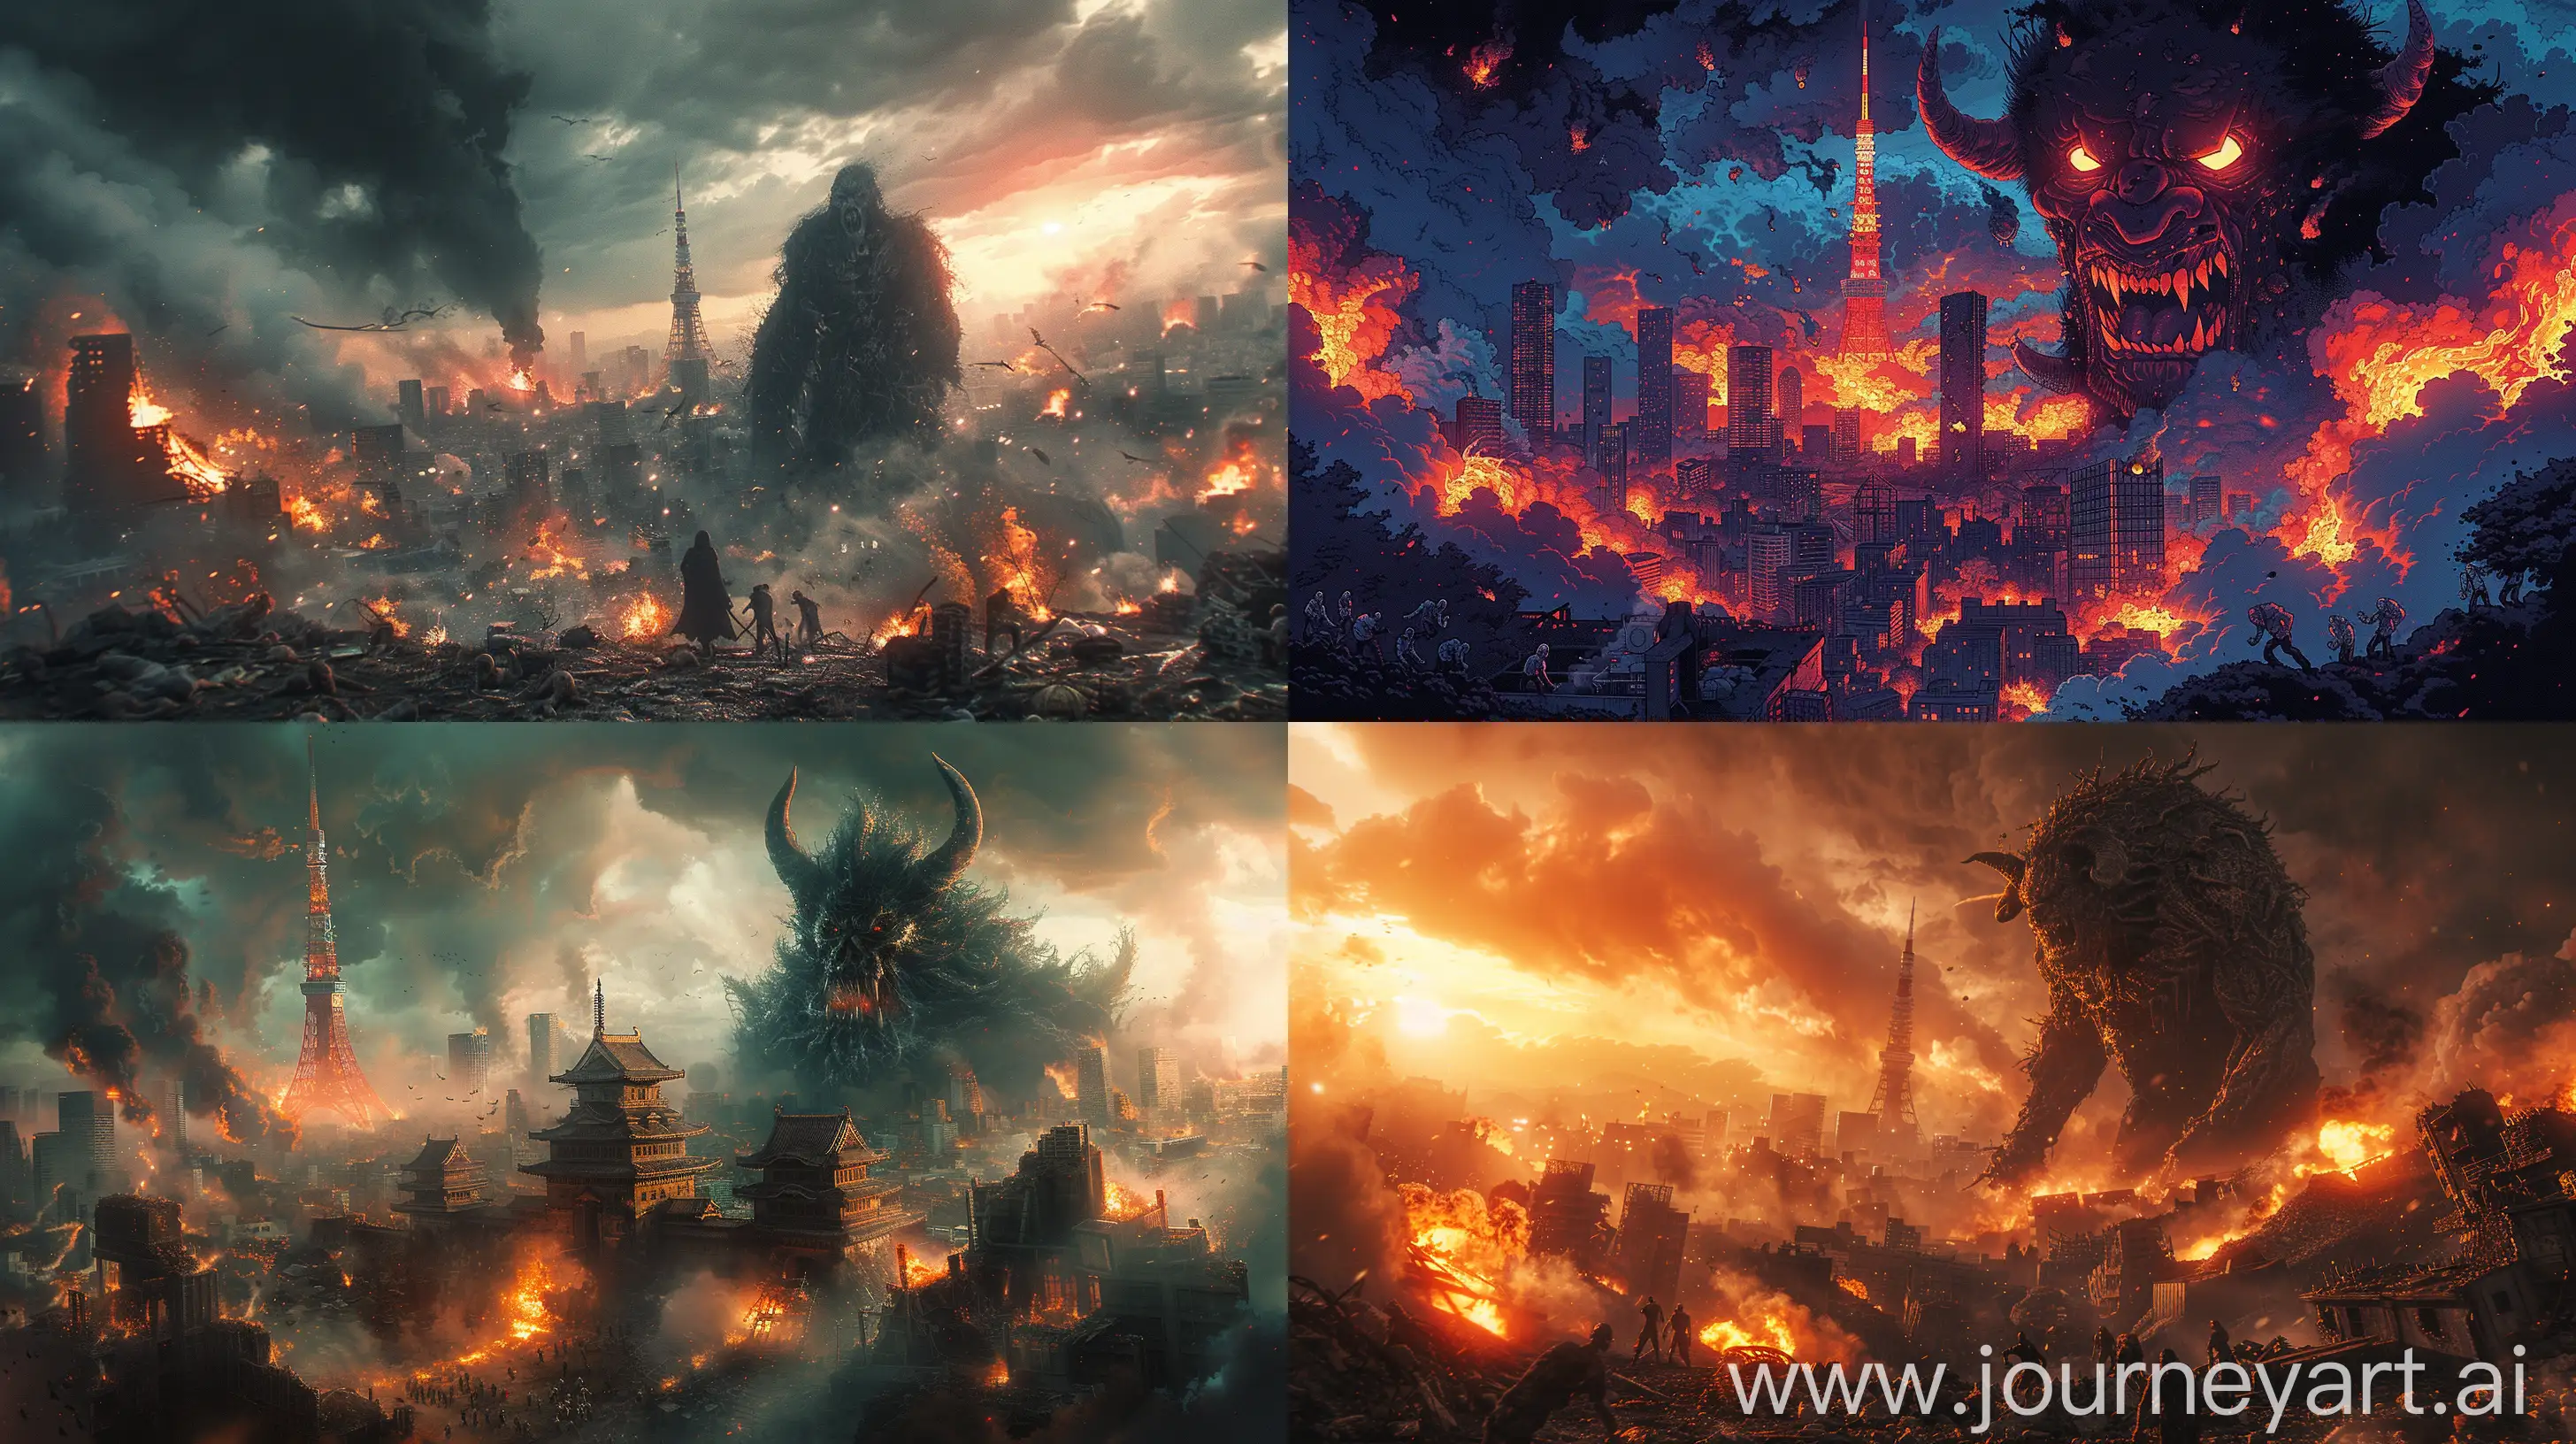 Dystopian-NeoTokyo-Giant-Oni-Zombies-and-Nuclear-Explosions